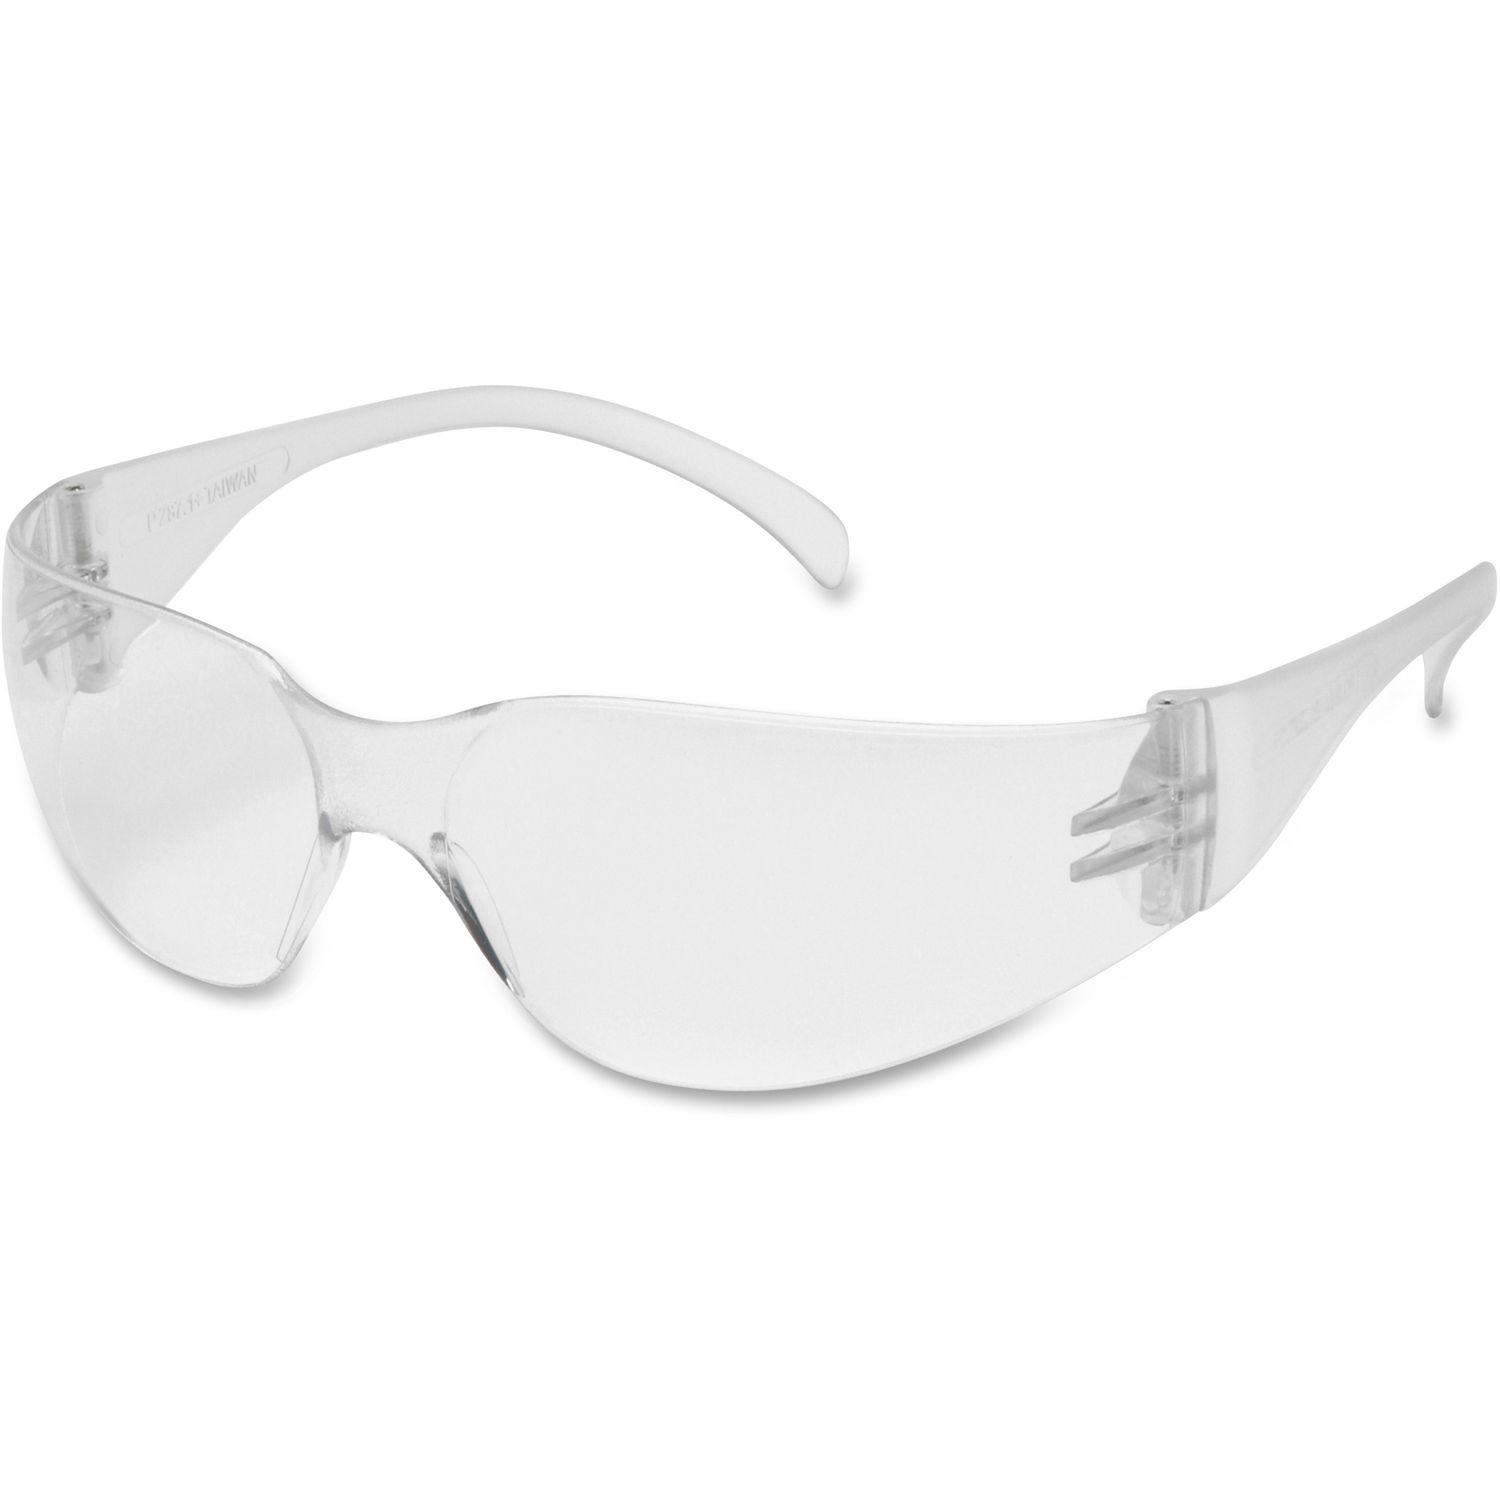 Classic 810 Frameless Safety Eyewear Anti-fog, Frameless, Lightweight, High Visibility, Comfortable, Ultraviolet Protection, Polycarbonate Lens, Polycarbonate Frame, Clear, 1 Each